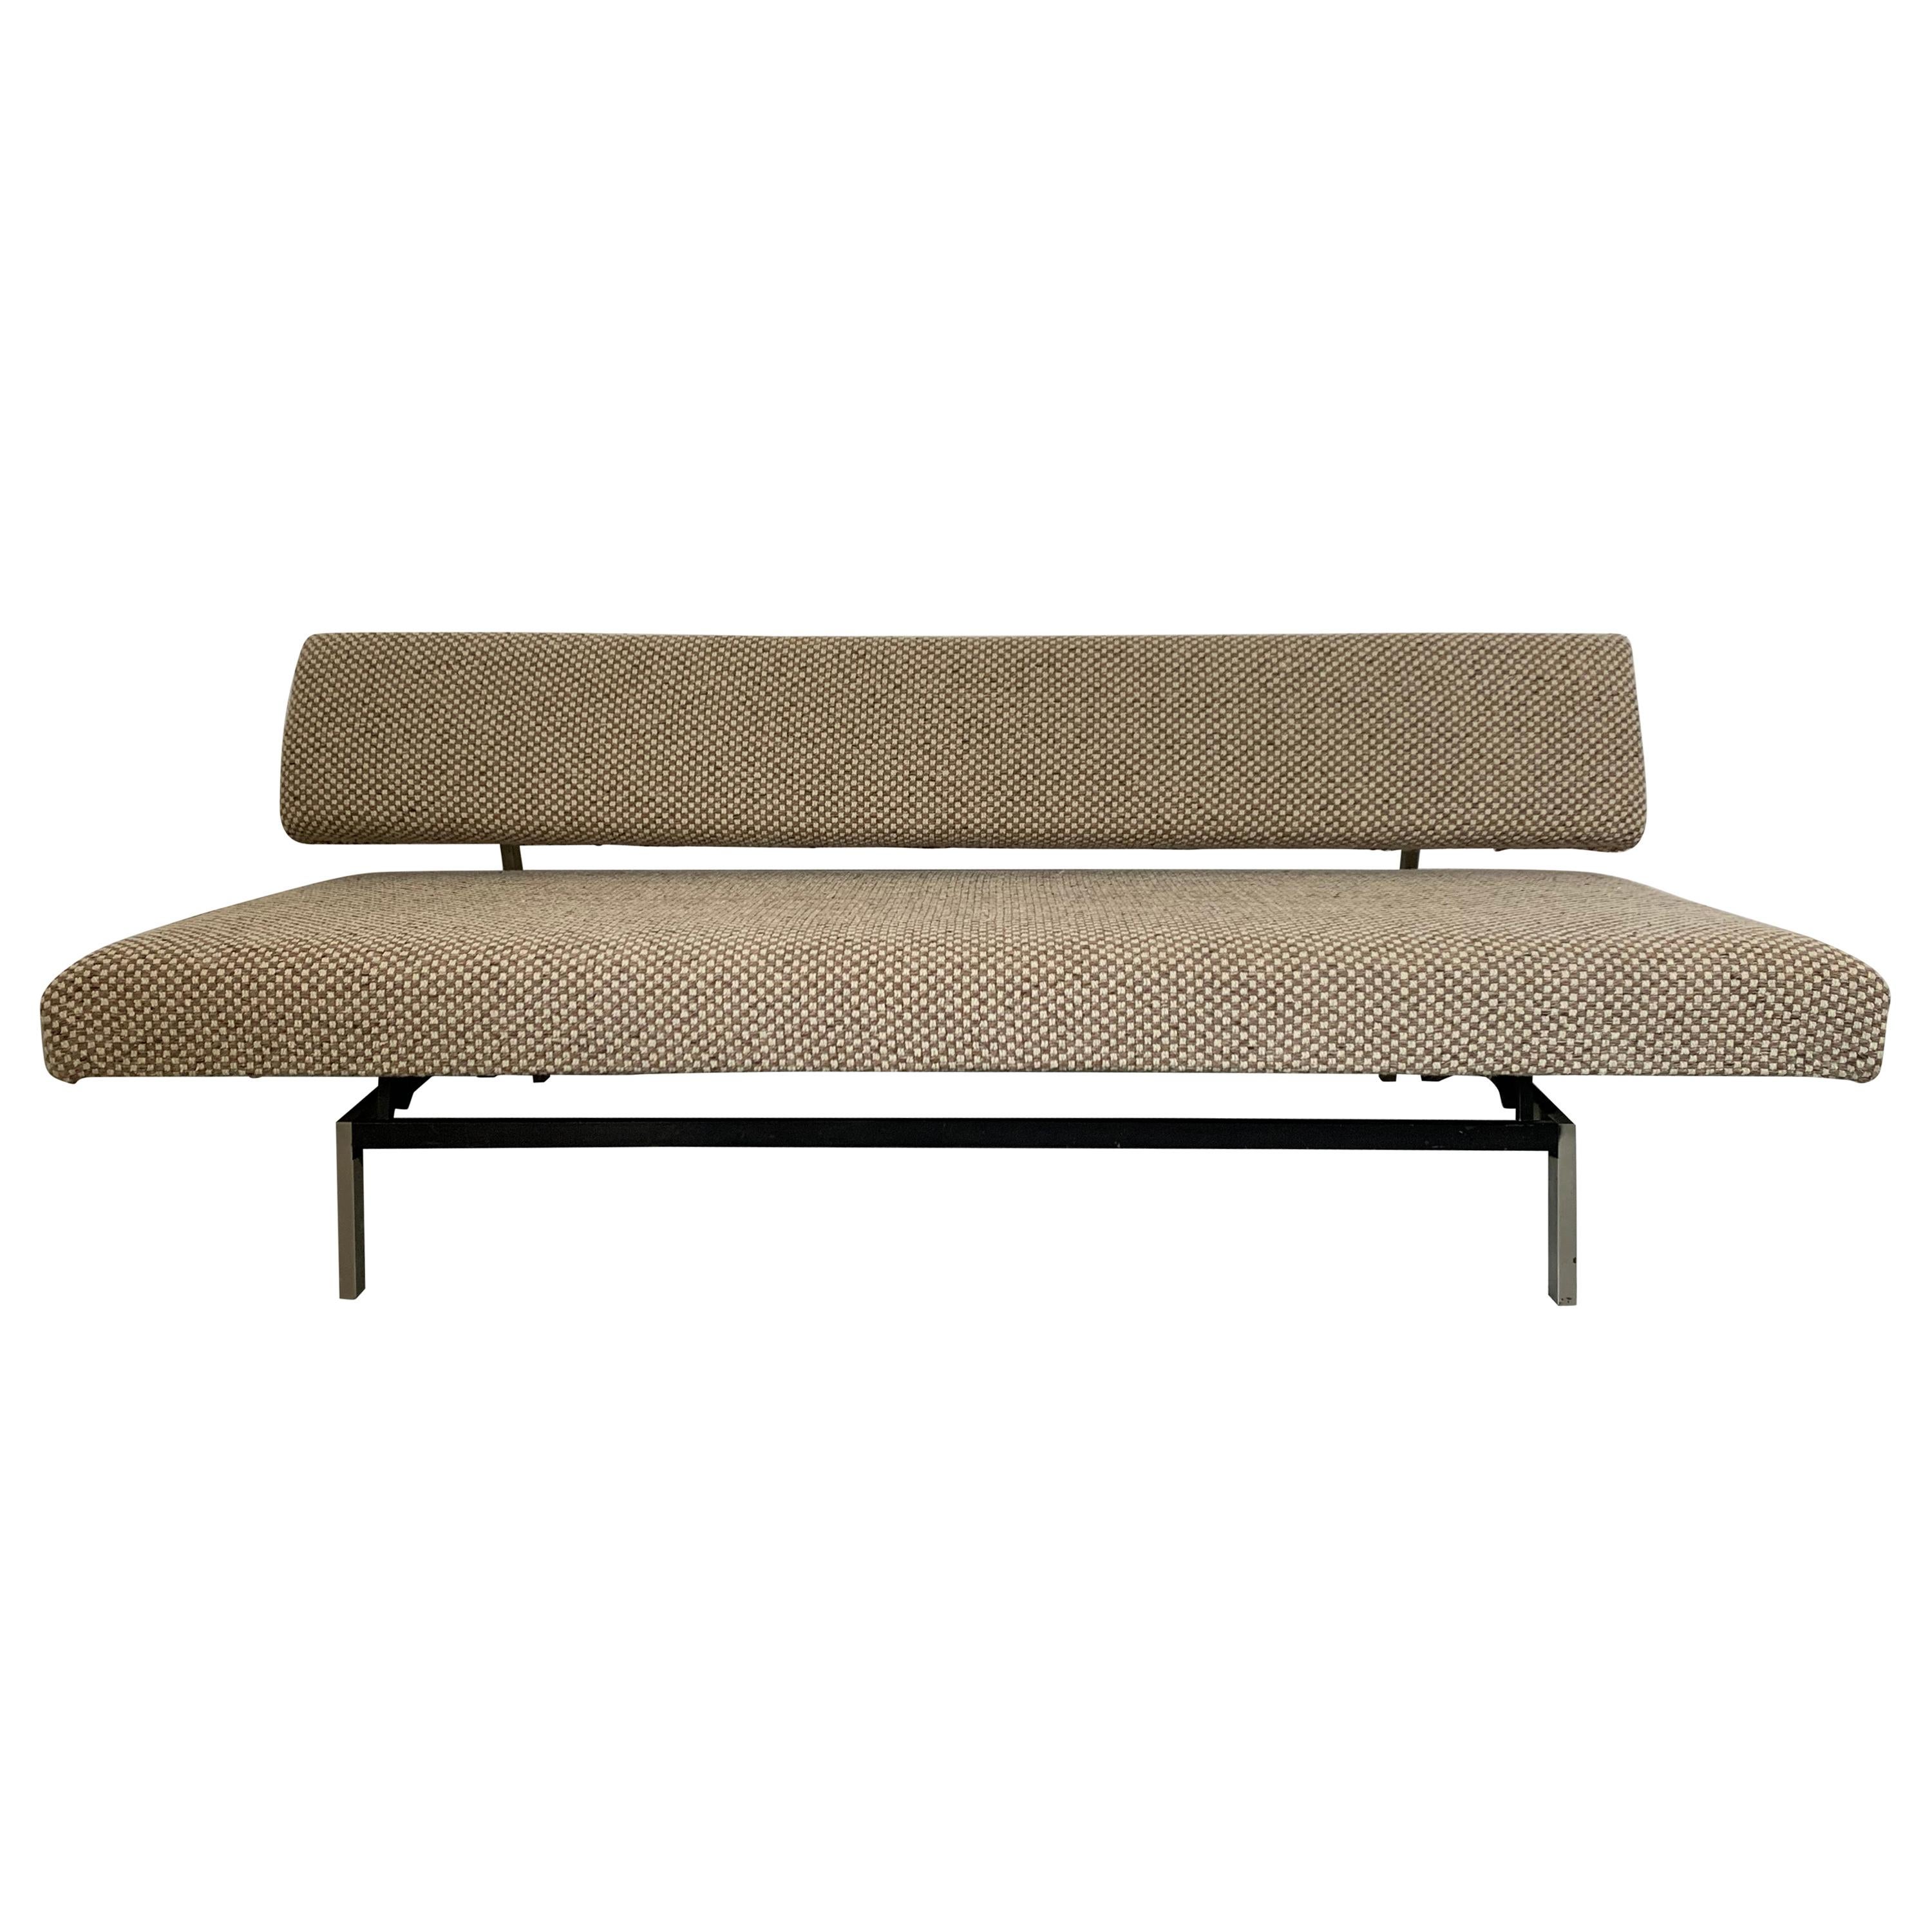 20th Century Br03 Daybed Sofa by Martin Visser for Spectrum, 1960s